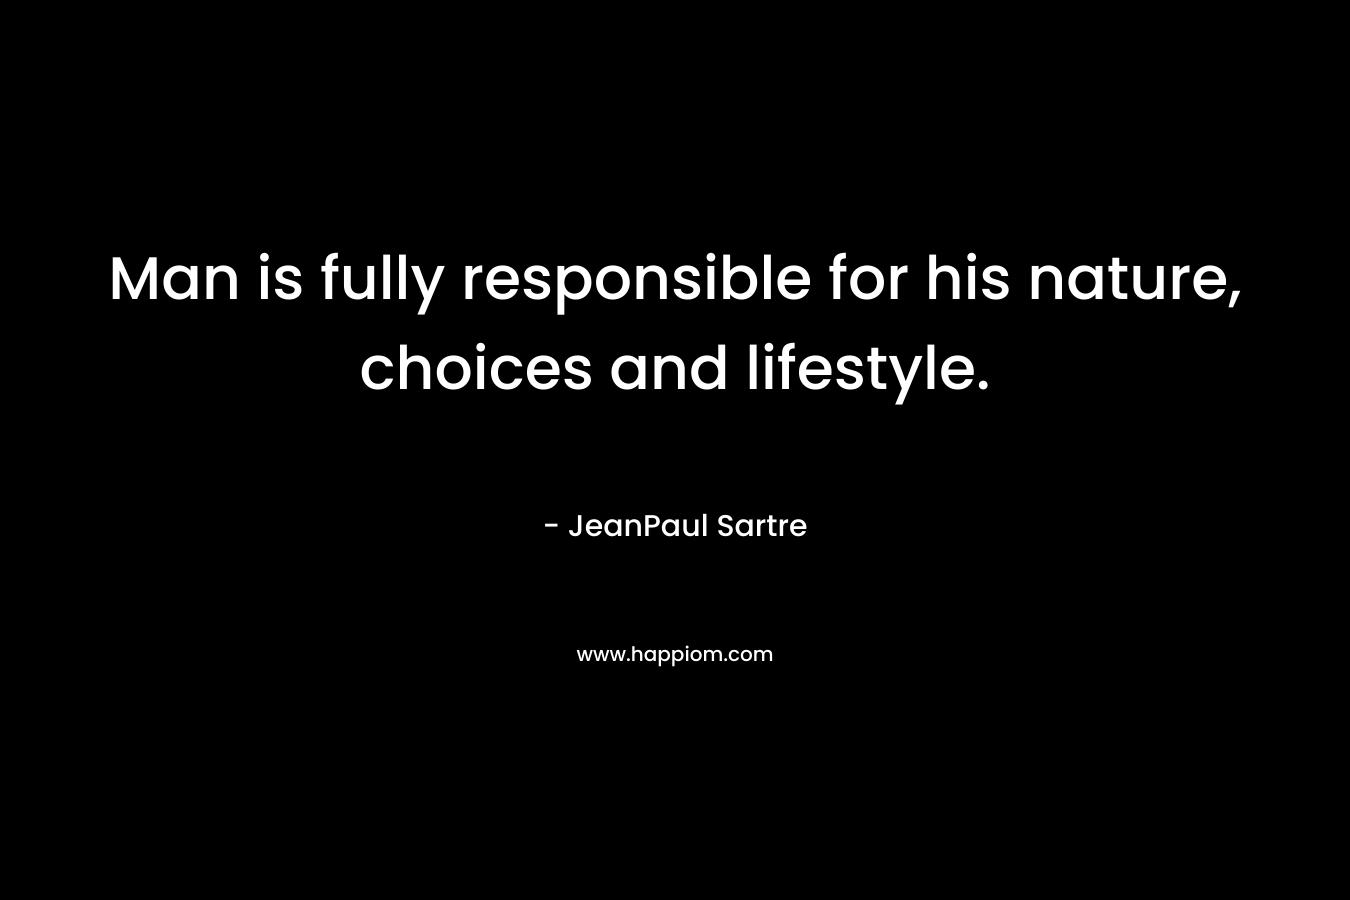 Man is fully responsible for his nature, choices and lifestyle. – JeanPaul Sartre